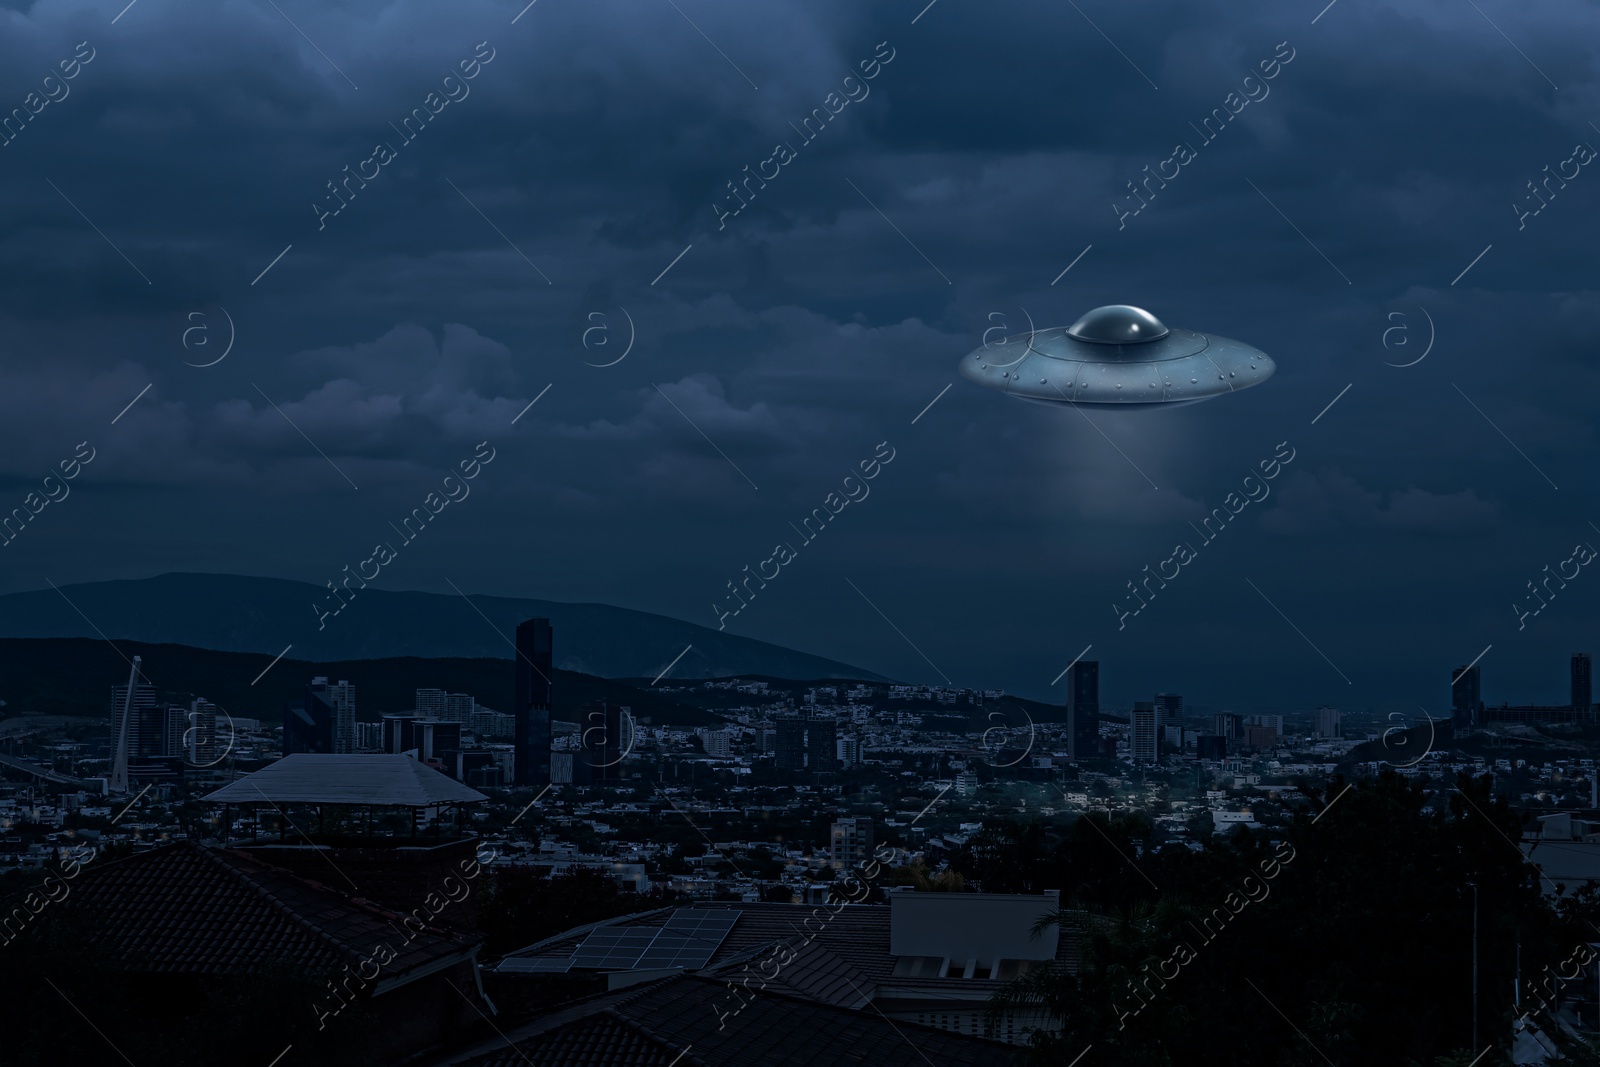 Image of Alien spaceship flying over city in evening. UFO, extraterrestrial visitors